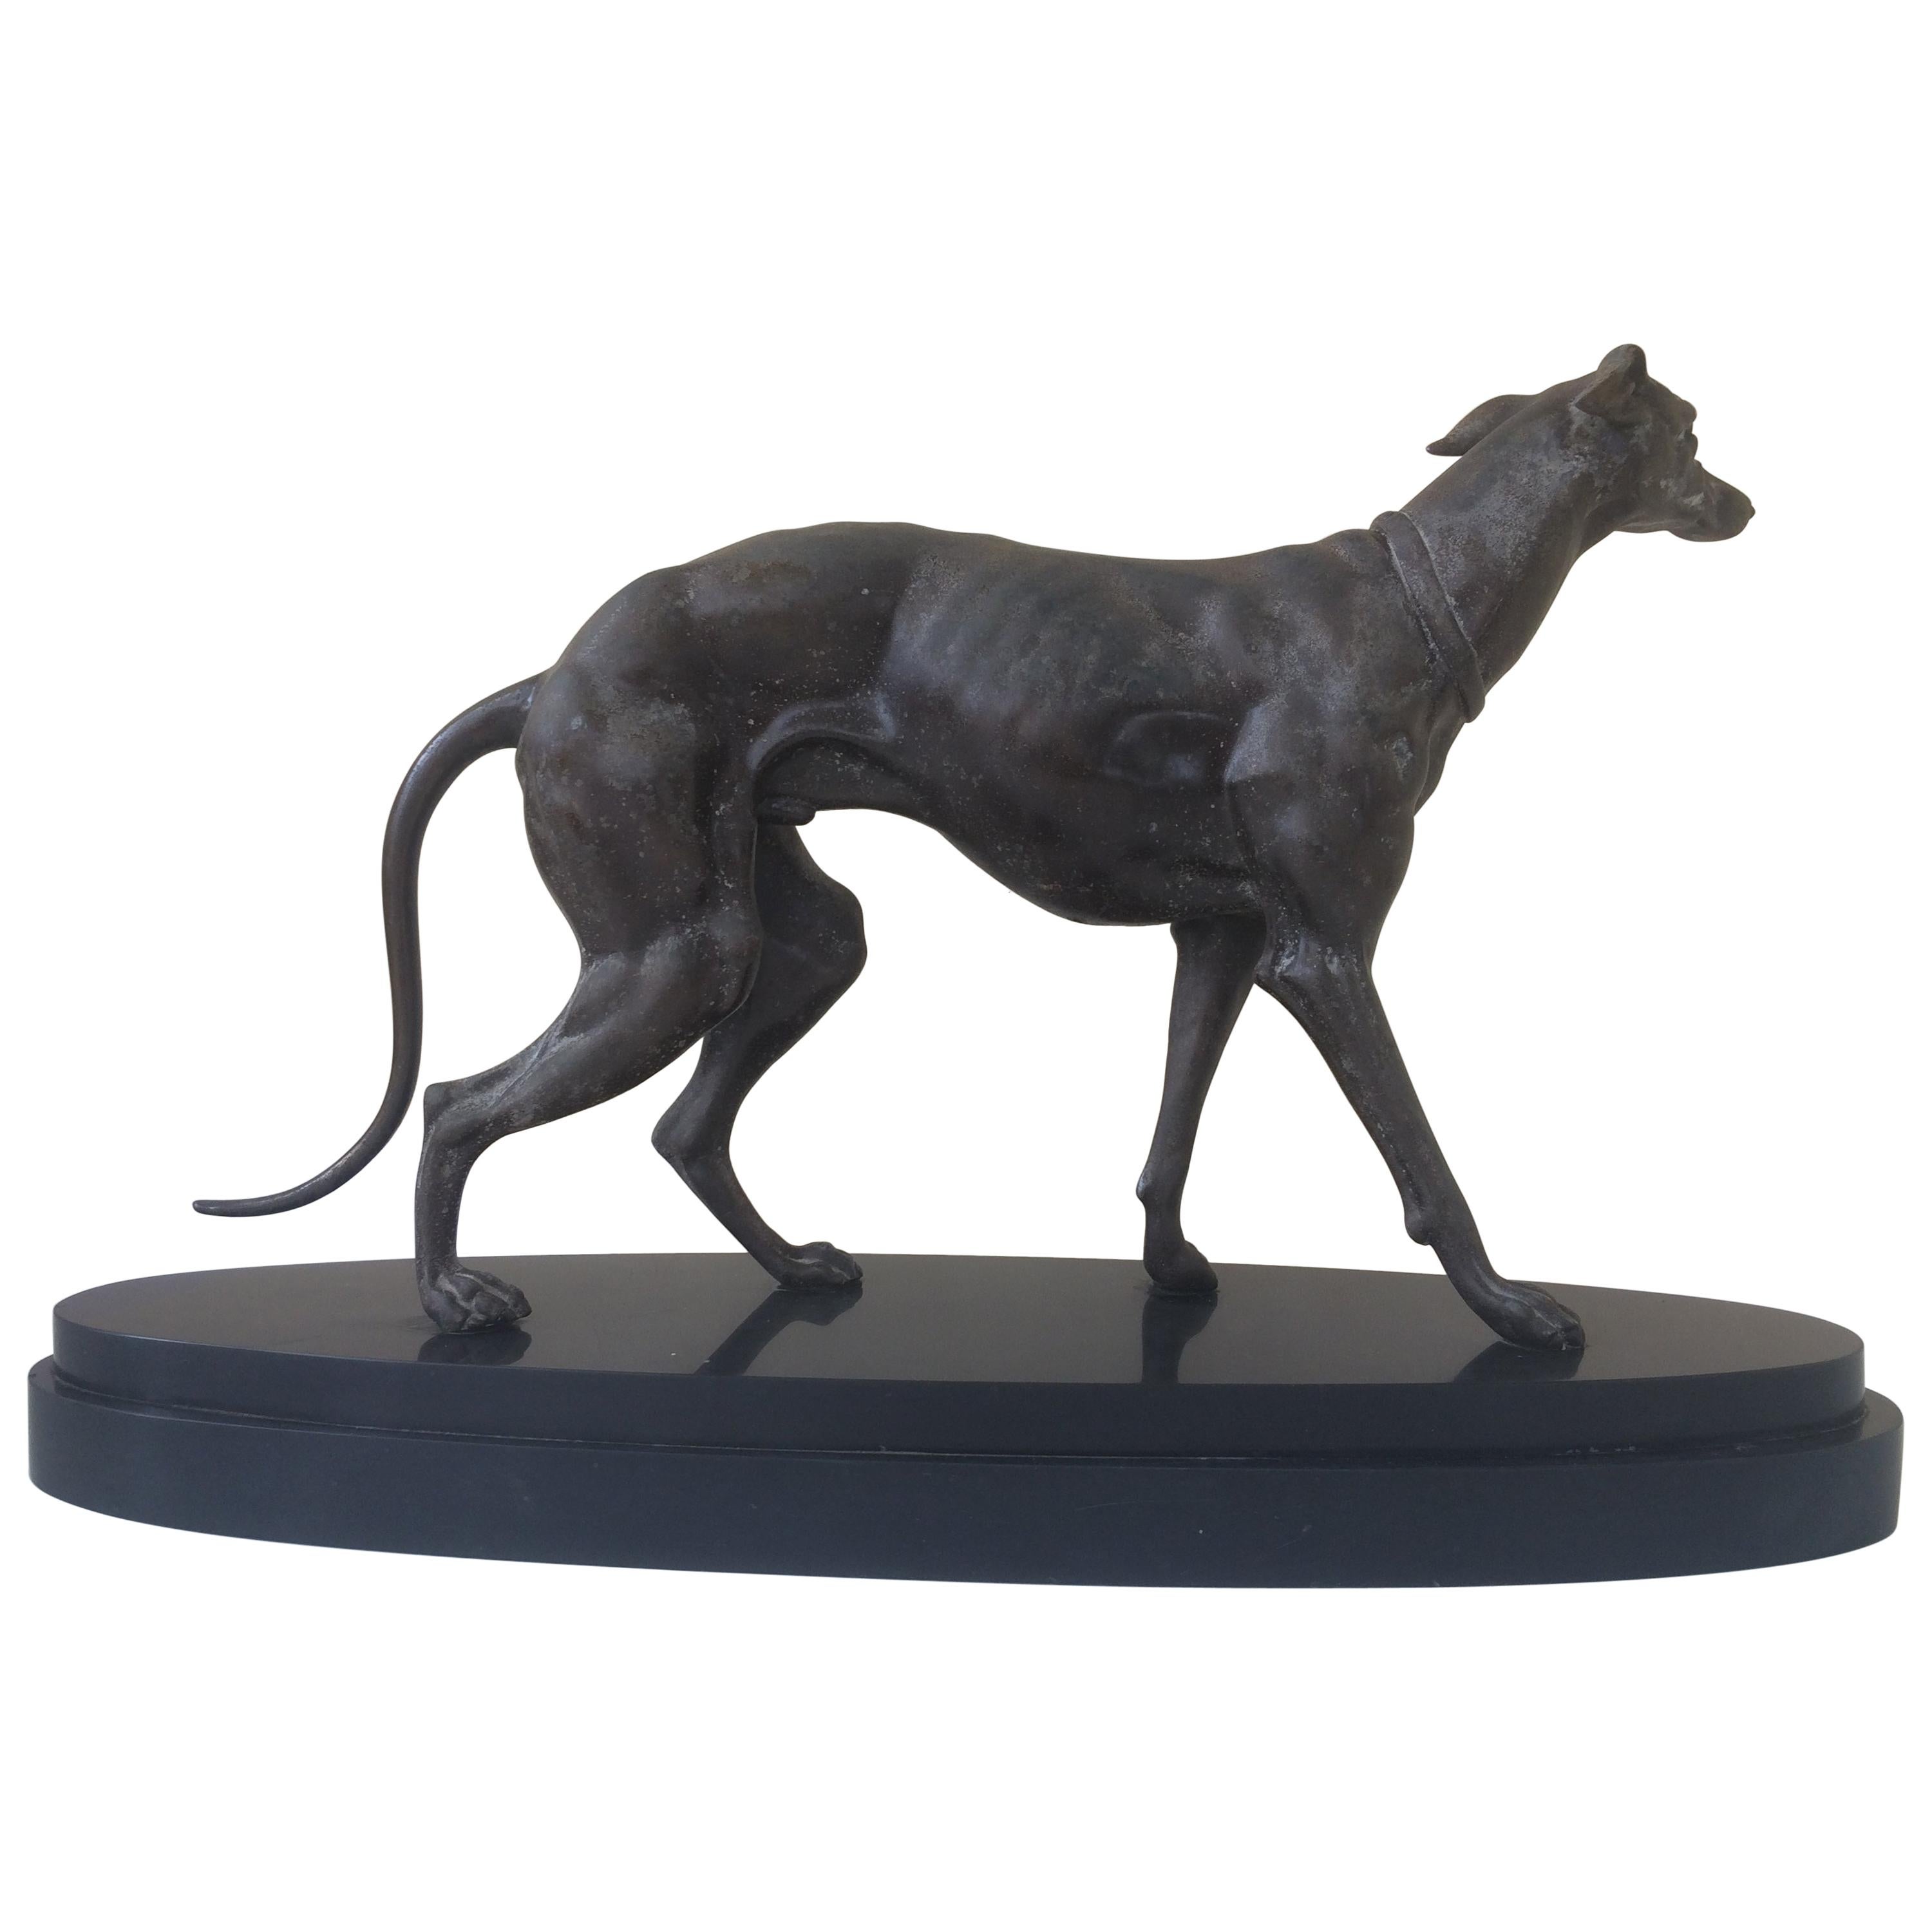 Couple Hounds Figurine Gift Idea Male and Female Greyhounds Sculpture on Base Two Hunting Dogs Vintage Statue